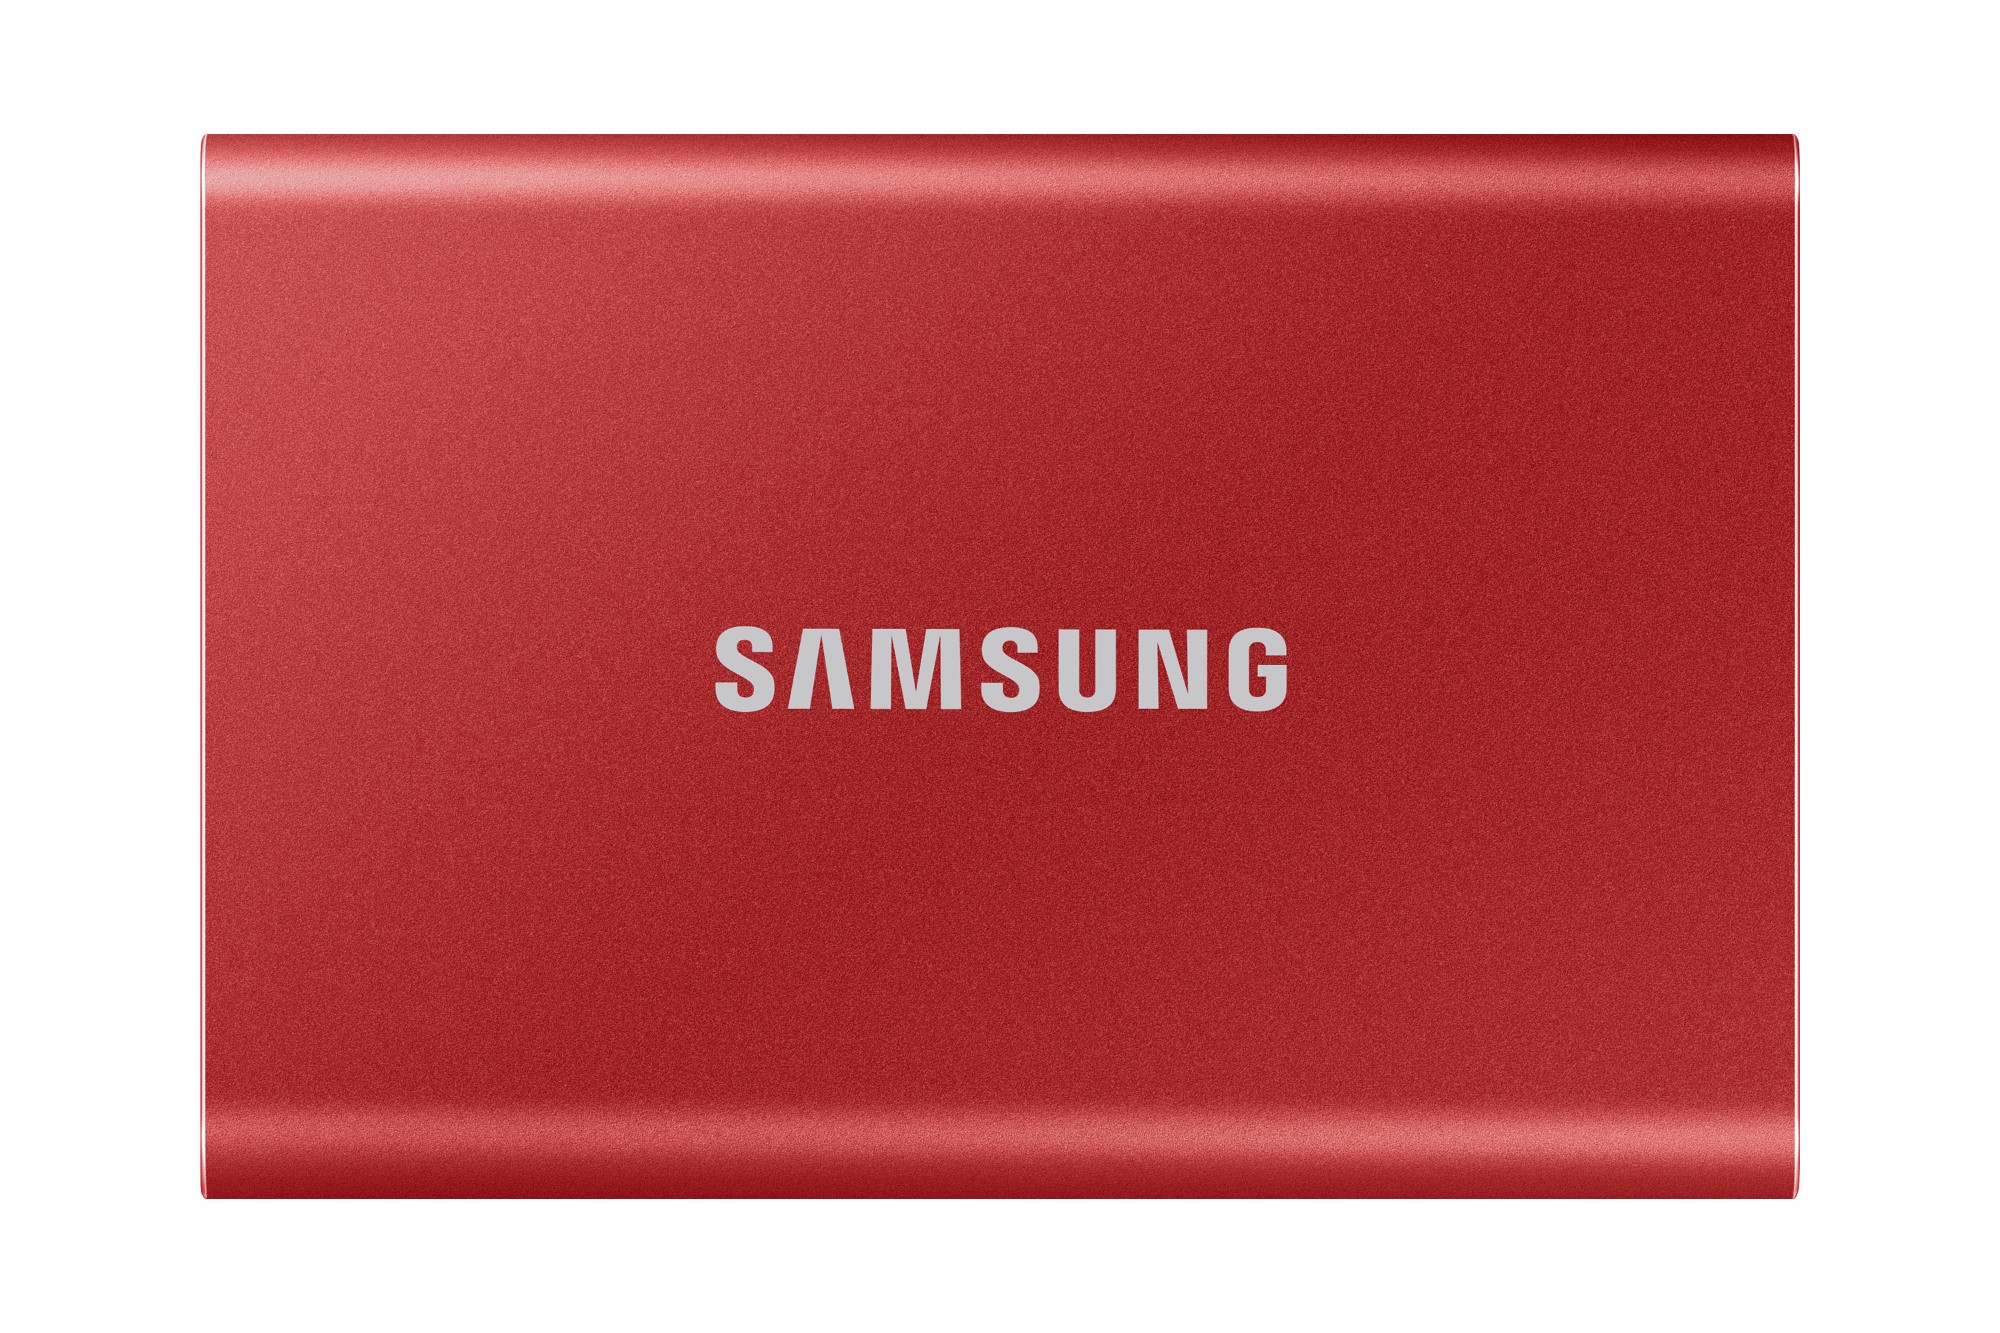 Samsung Portable SSD T7 1000 GB Red